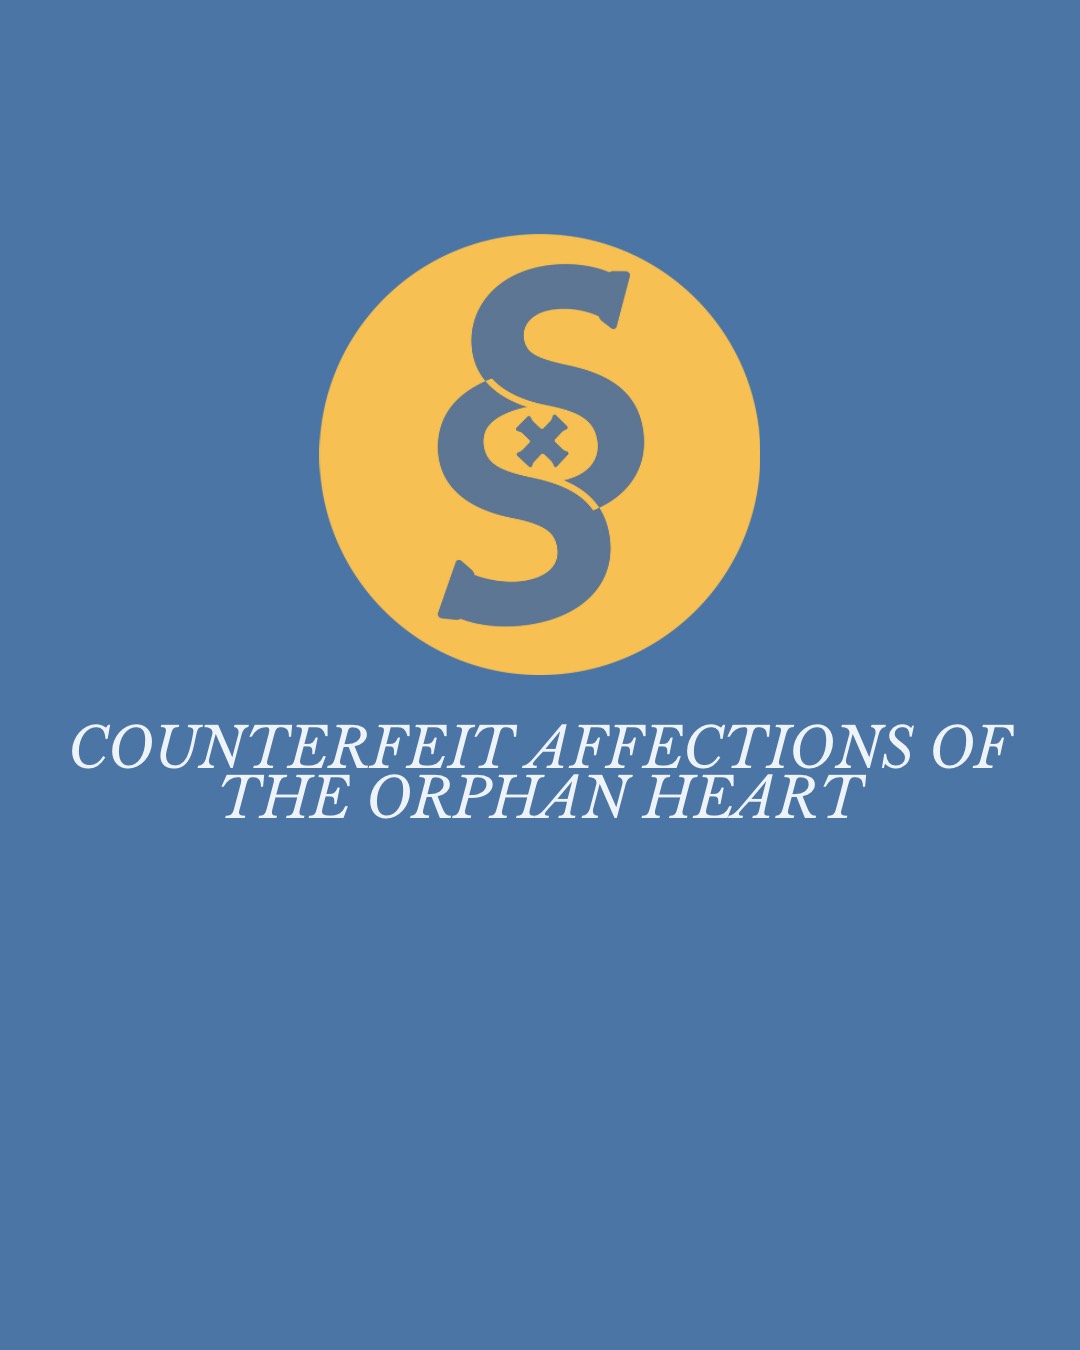 Counterfeit Affections of the Orphan Heart